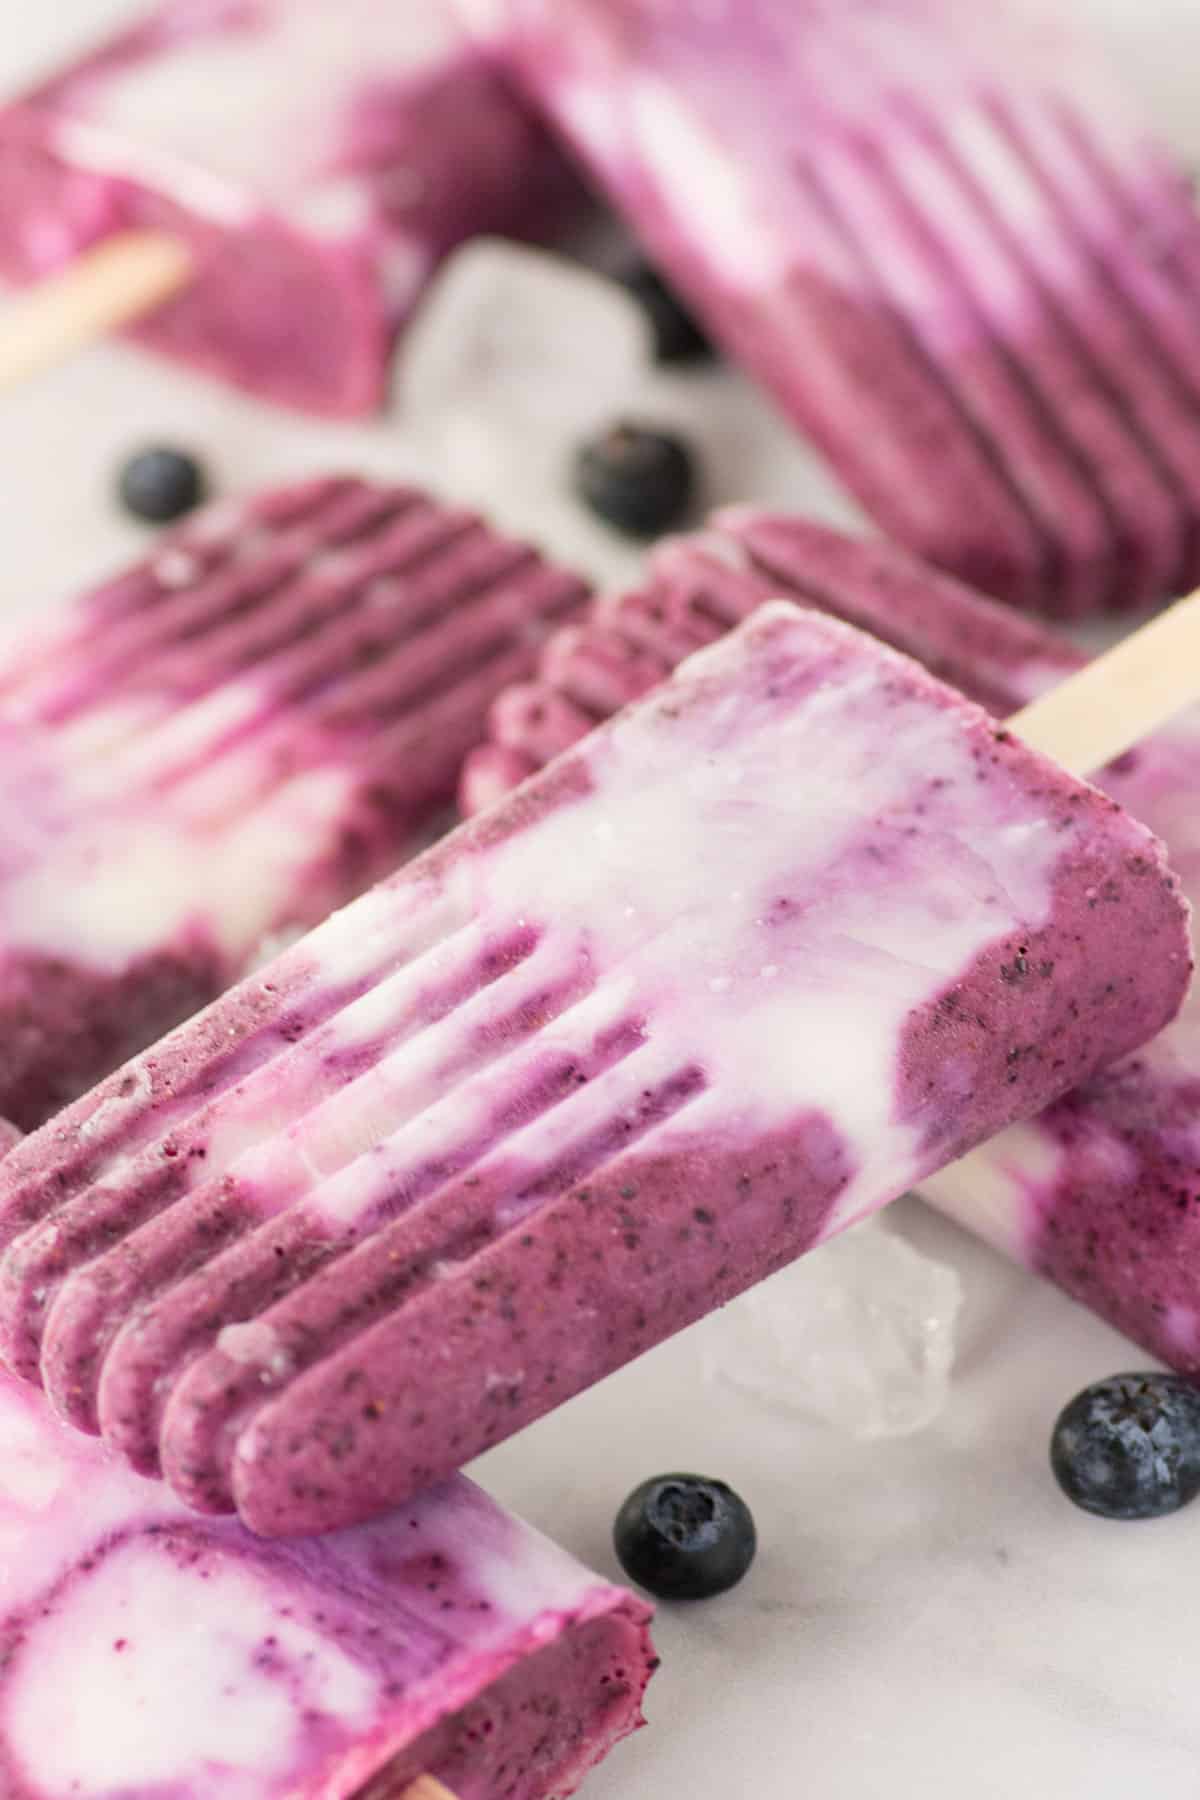 Blueberry Orange Homemade Popsicles stacked together with some blueberries scattered about.